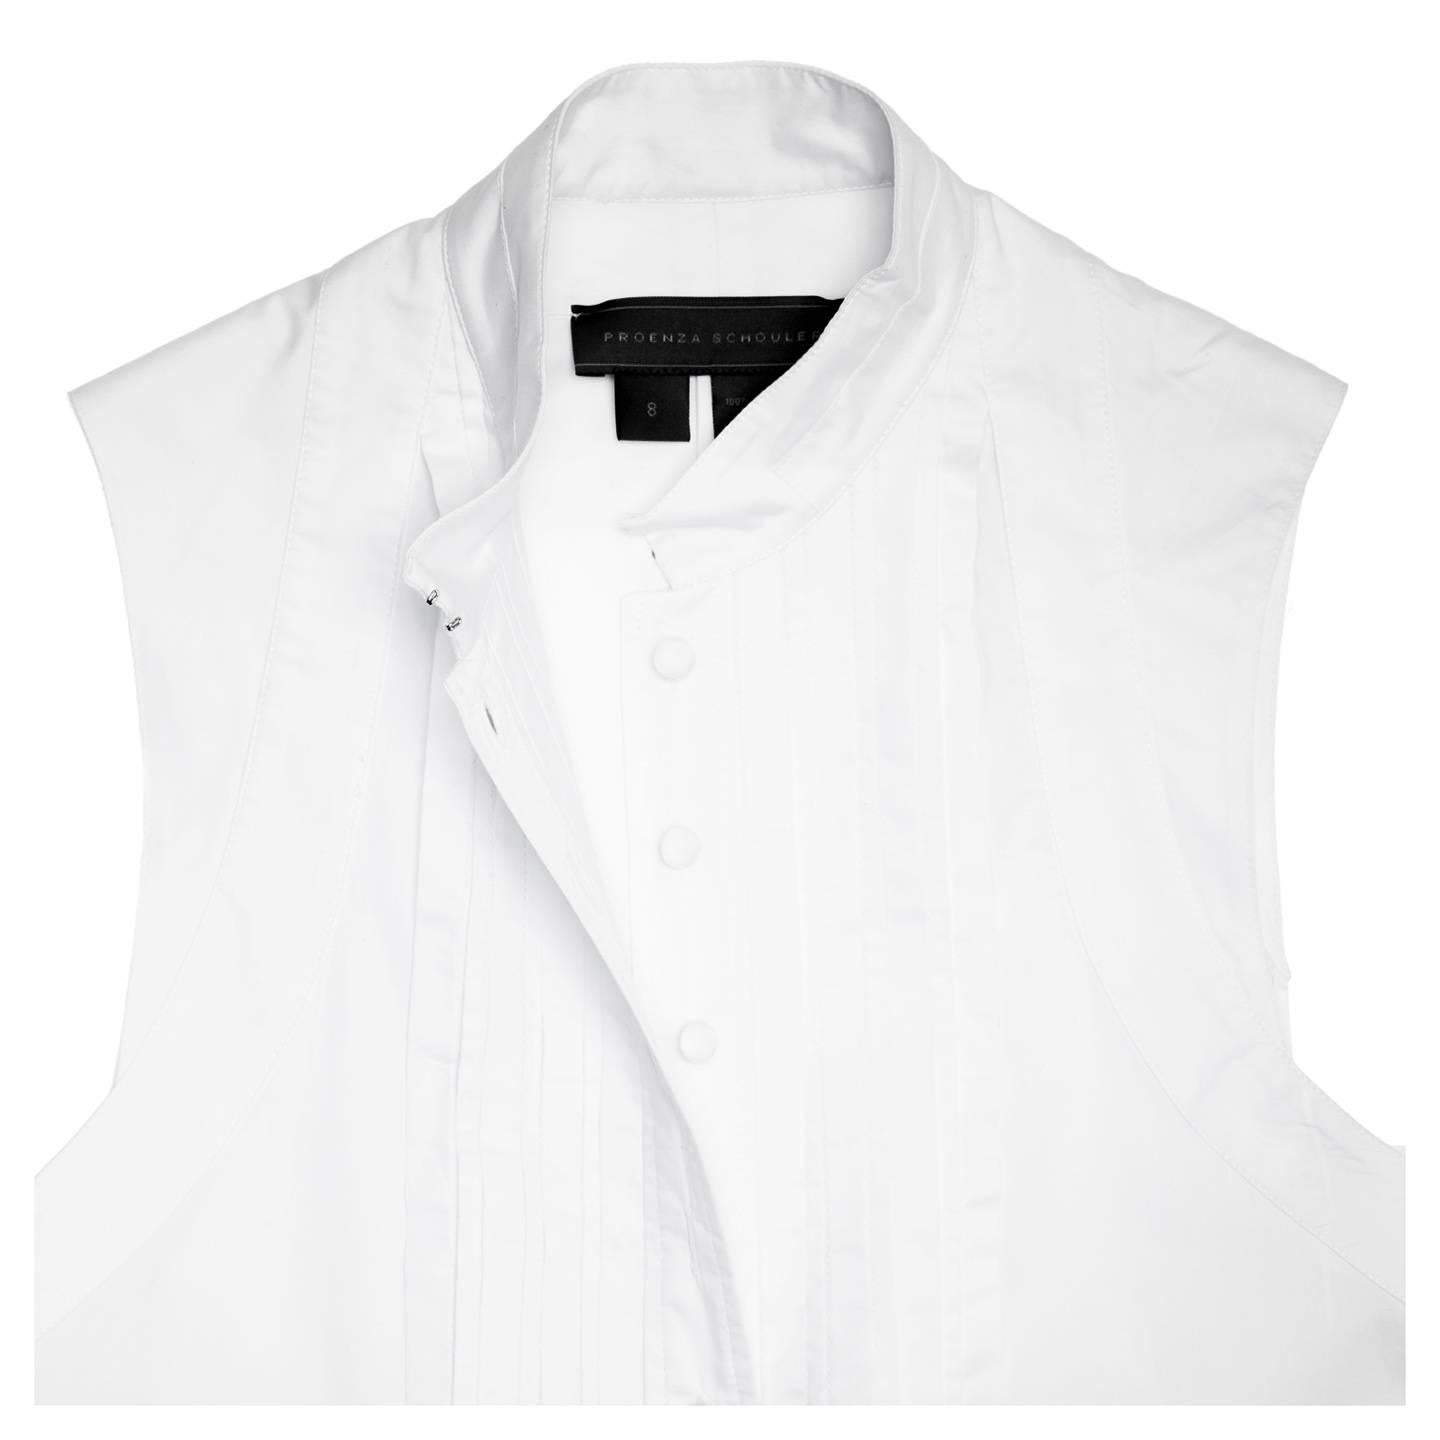 Proenza Schouler White Cotton Sleeveless Shirt Dress In New Condition For Sale In Brooklyn, NY